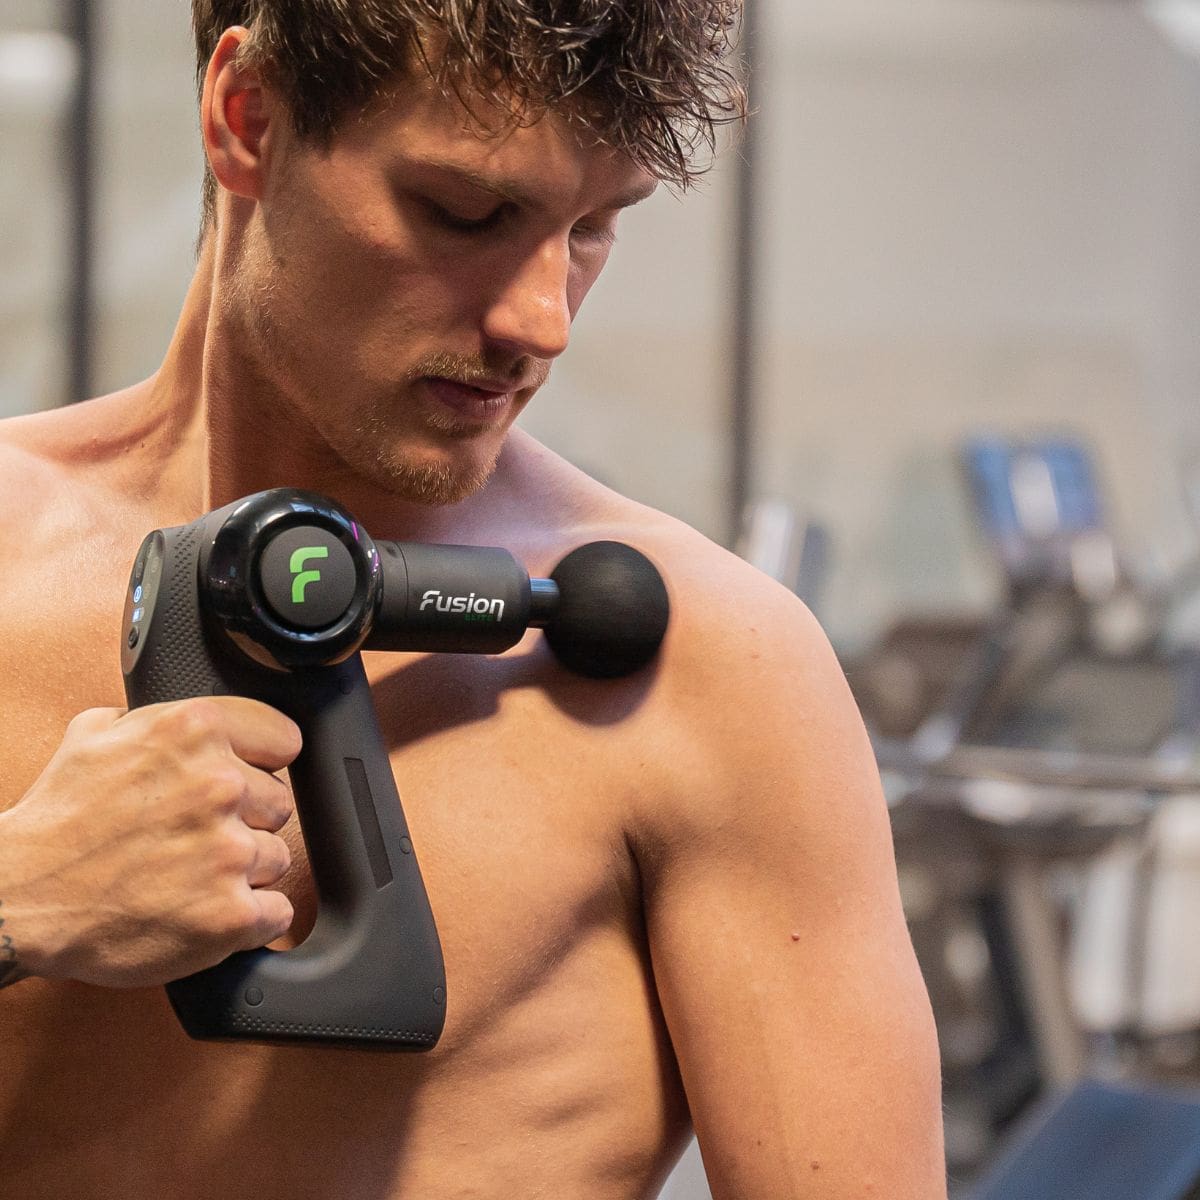 Best Workout Recovery Tools: Proven Picks to Help You Recover Faster